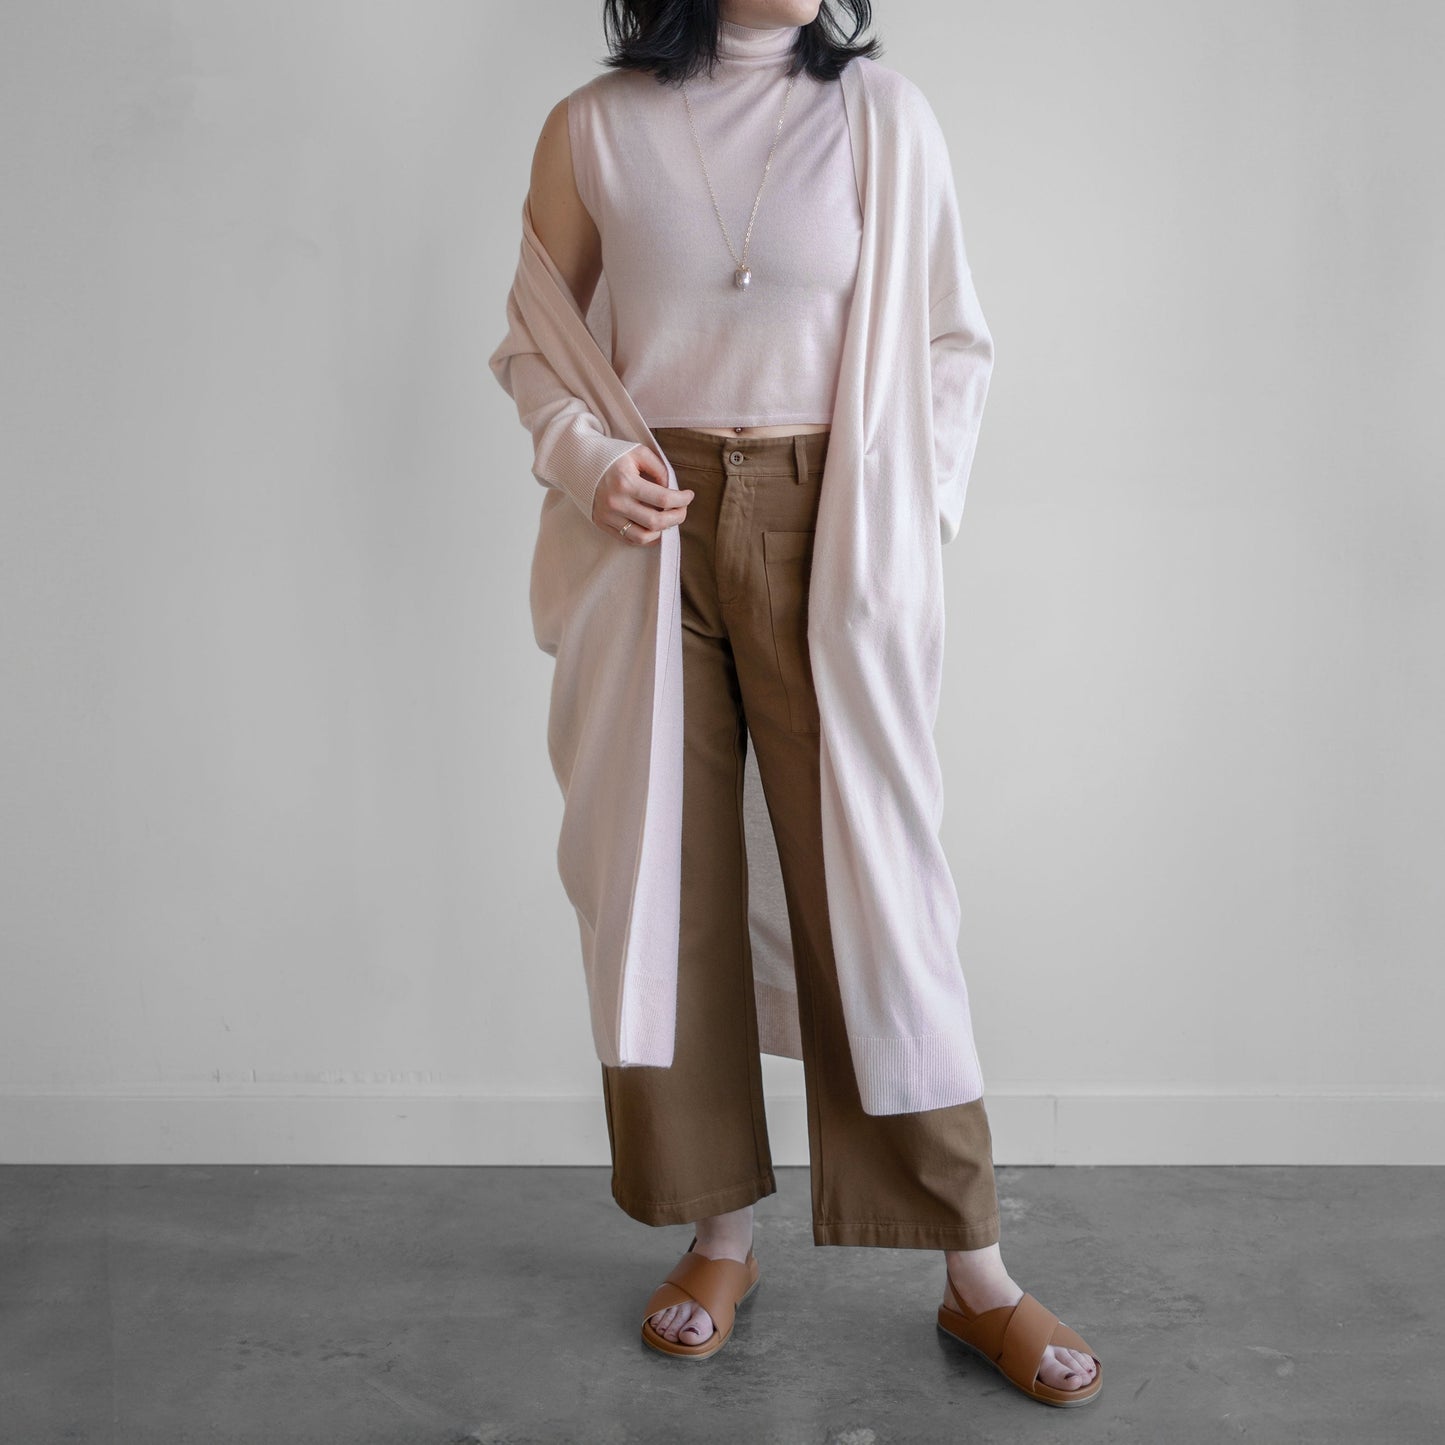 Sybil Cashmere Duster in Lunar